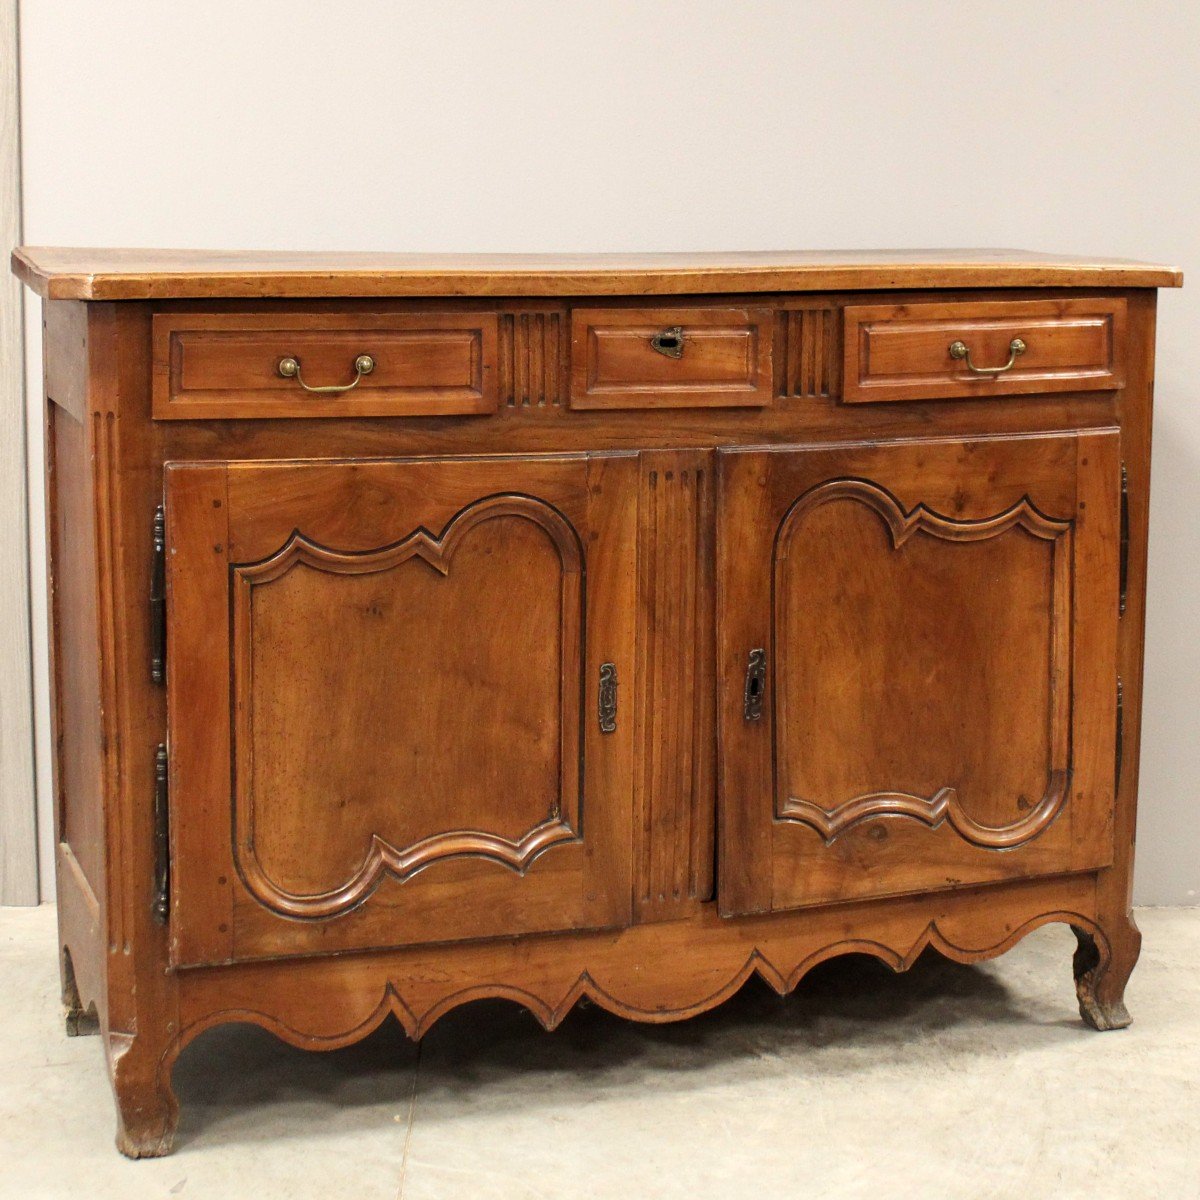 Antique Louis XV Sideboard Dresser Cabinet Cupboard Buffet In Walnut And Cherrywood – 18th